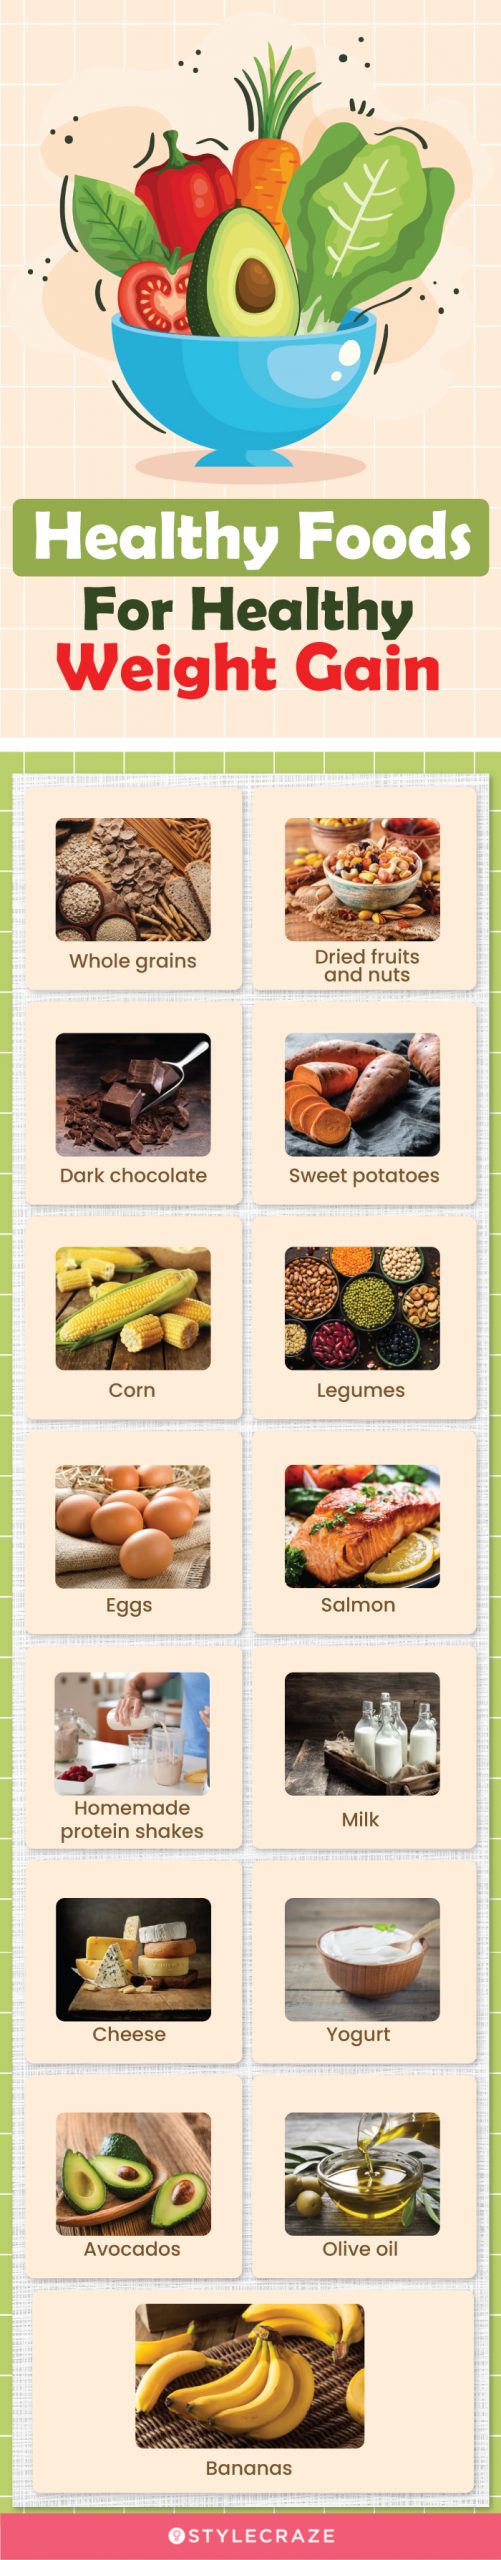 healthy foods for healthy weight gain [infographic]